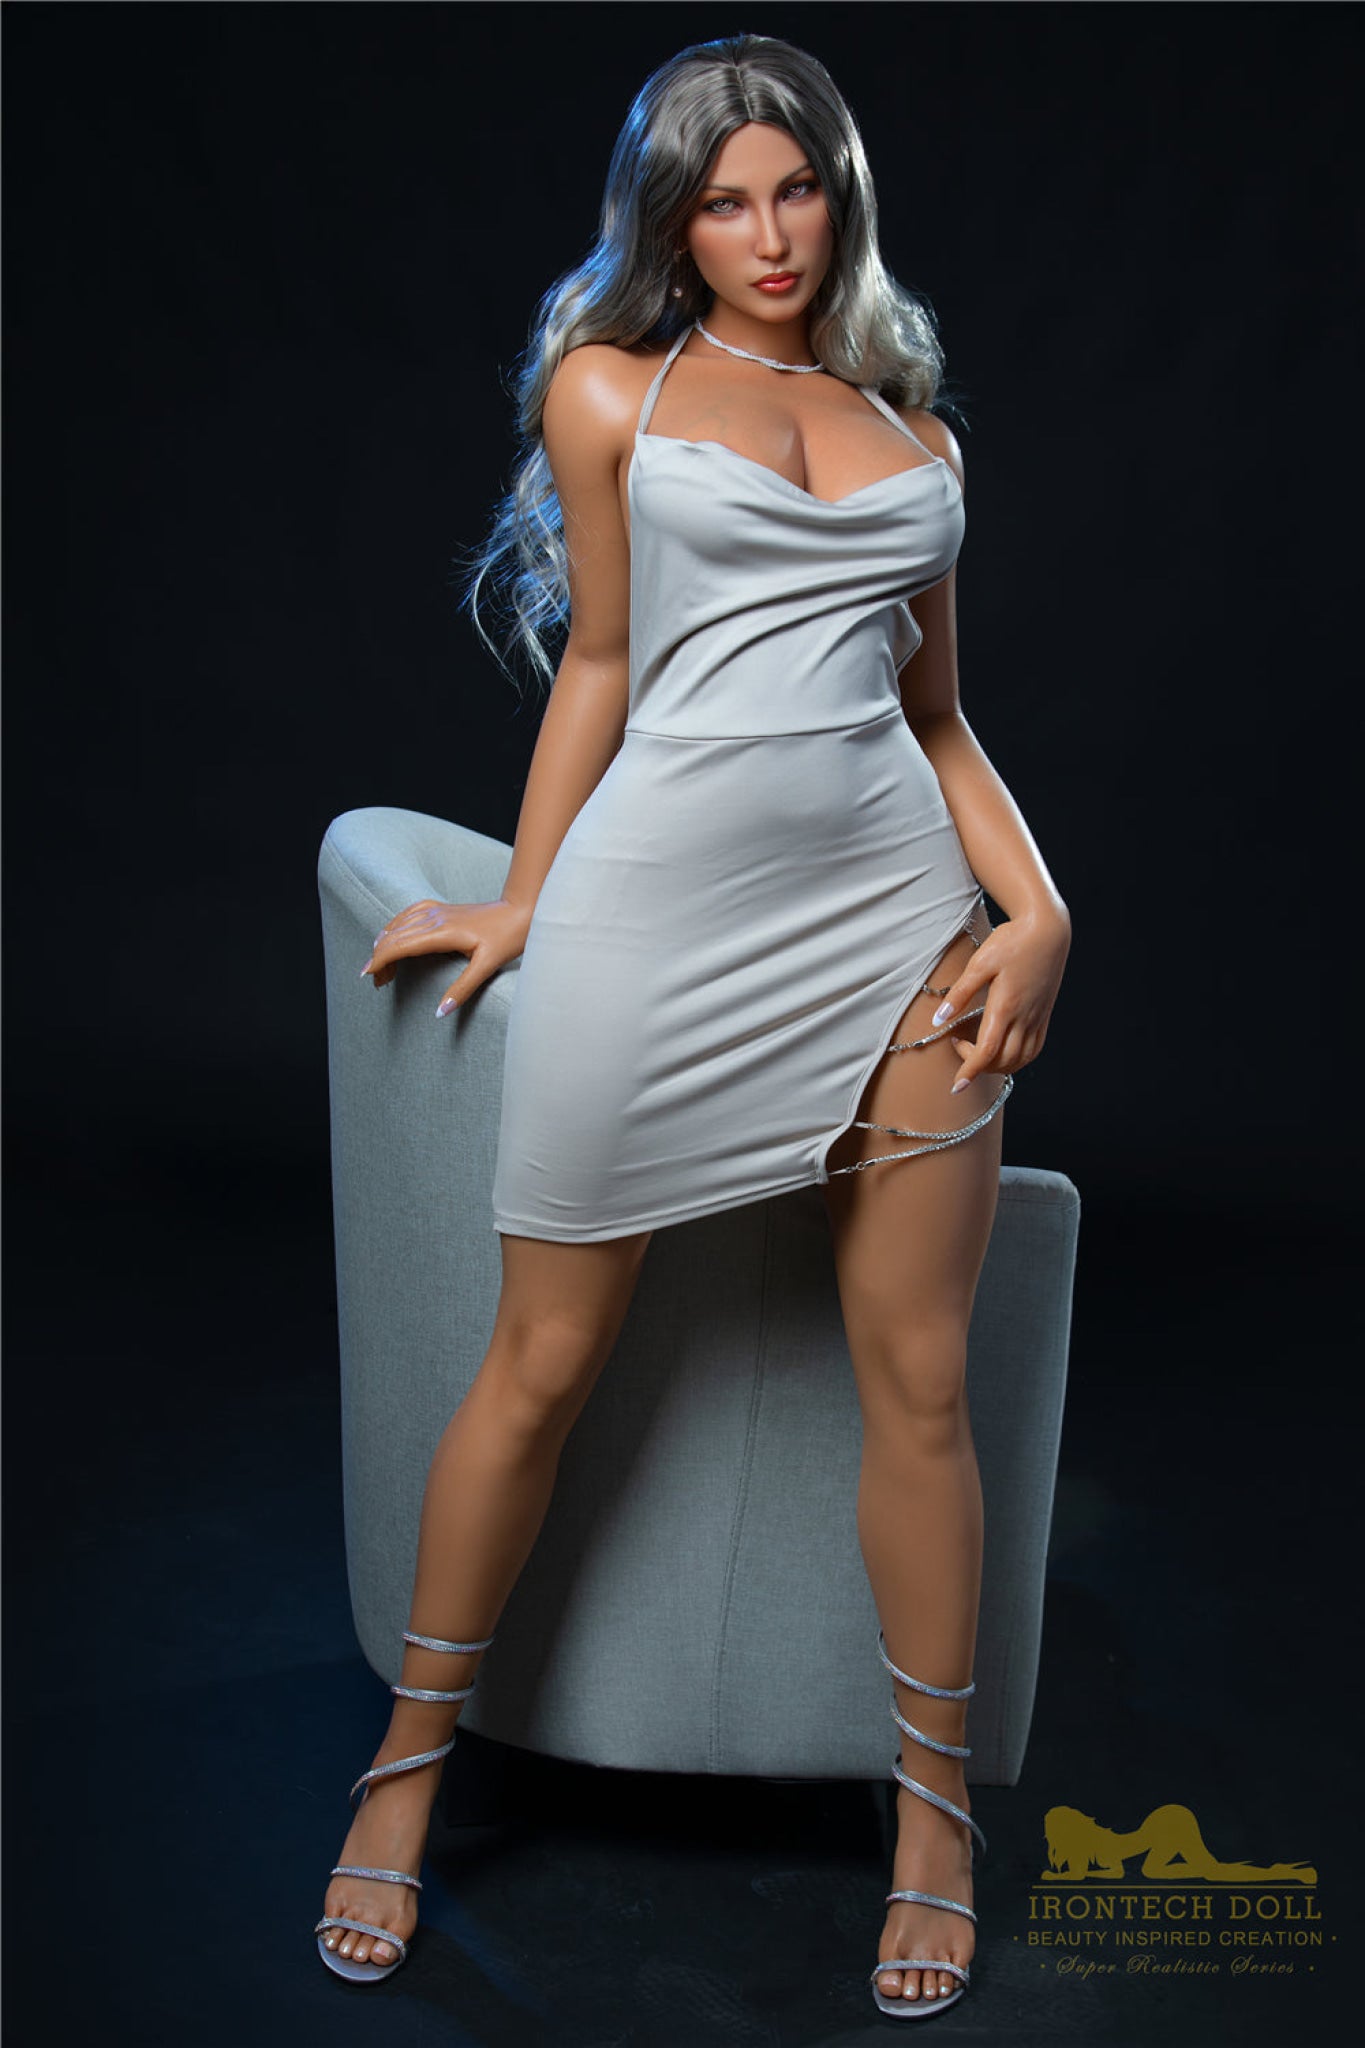 Catlin Silicone Real Doll - IronTech Doll® Irontech Doll®